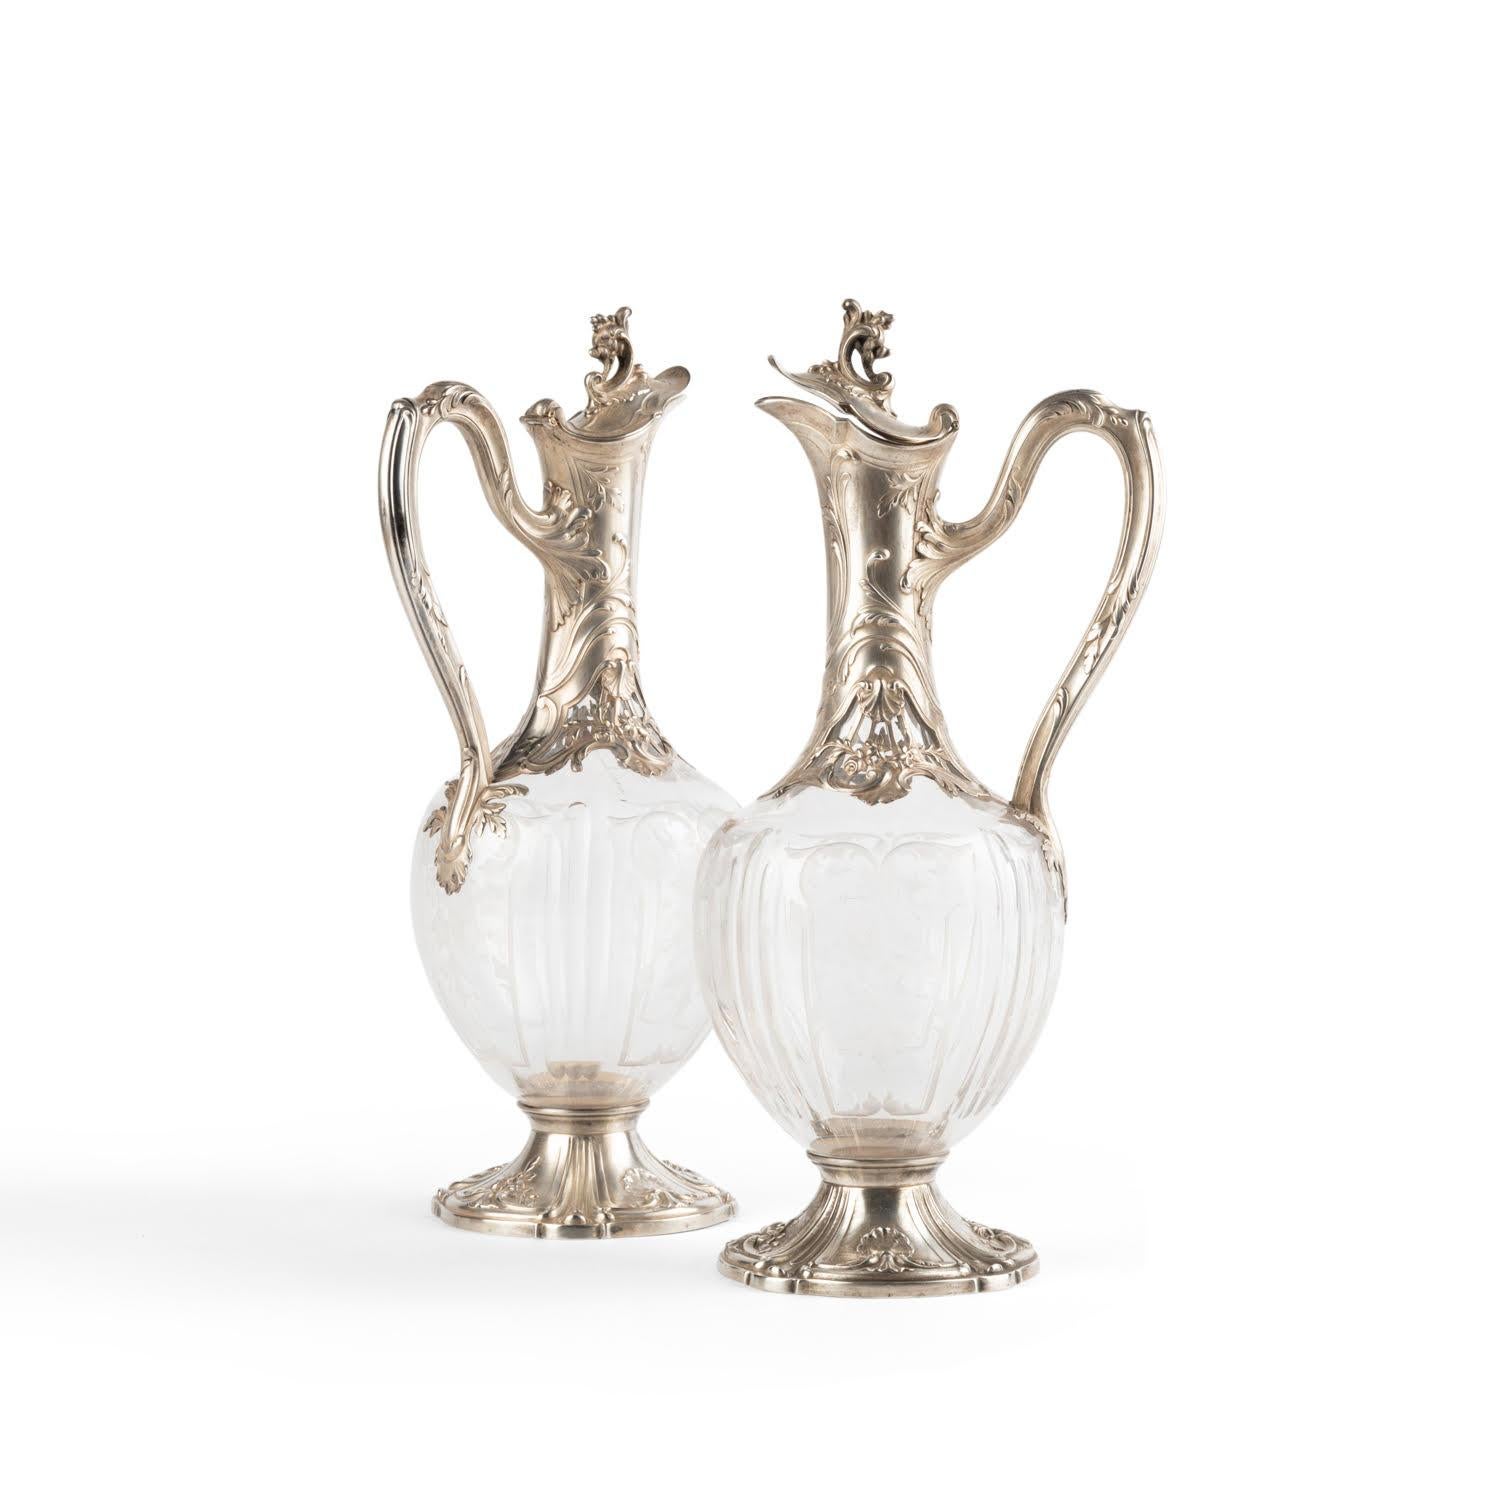 Pair of Louis XV style silver and crystal ewers.

Pair of silver and crystal ewers in the Louis XV style, 19th century.    
h: 22cm , D: 11cm